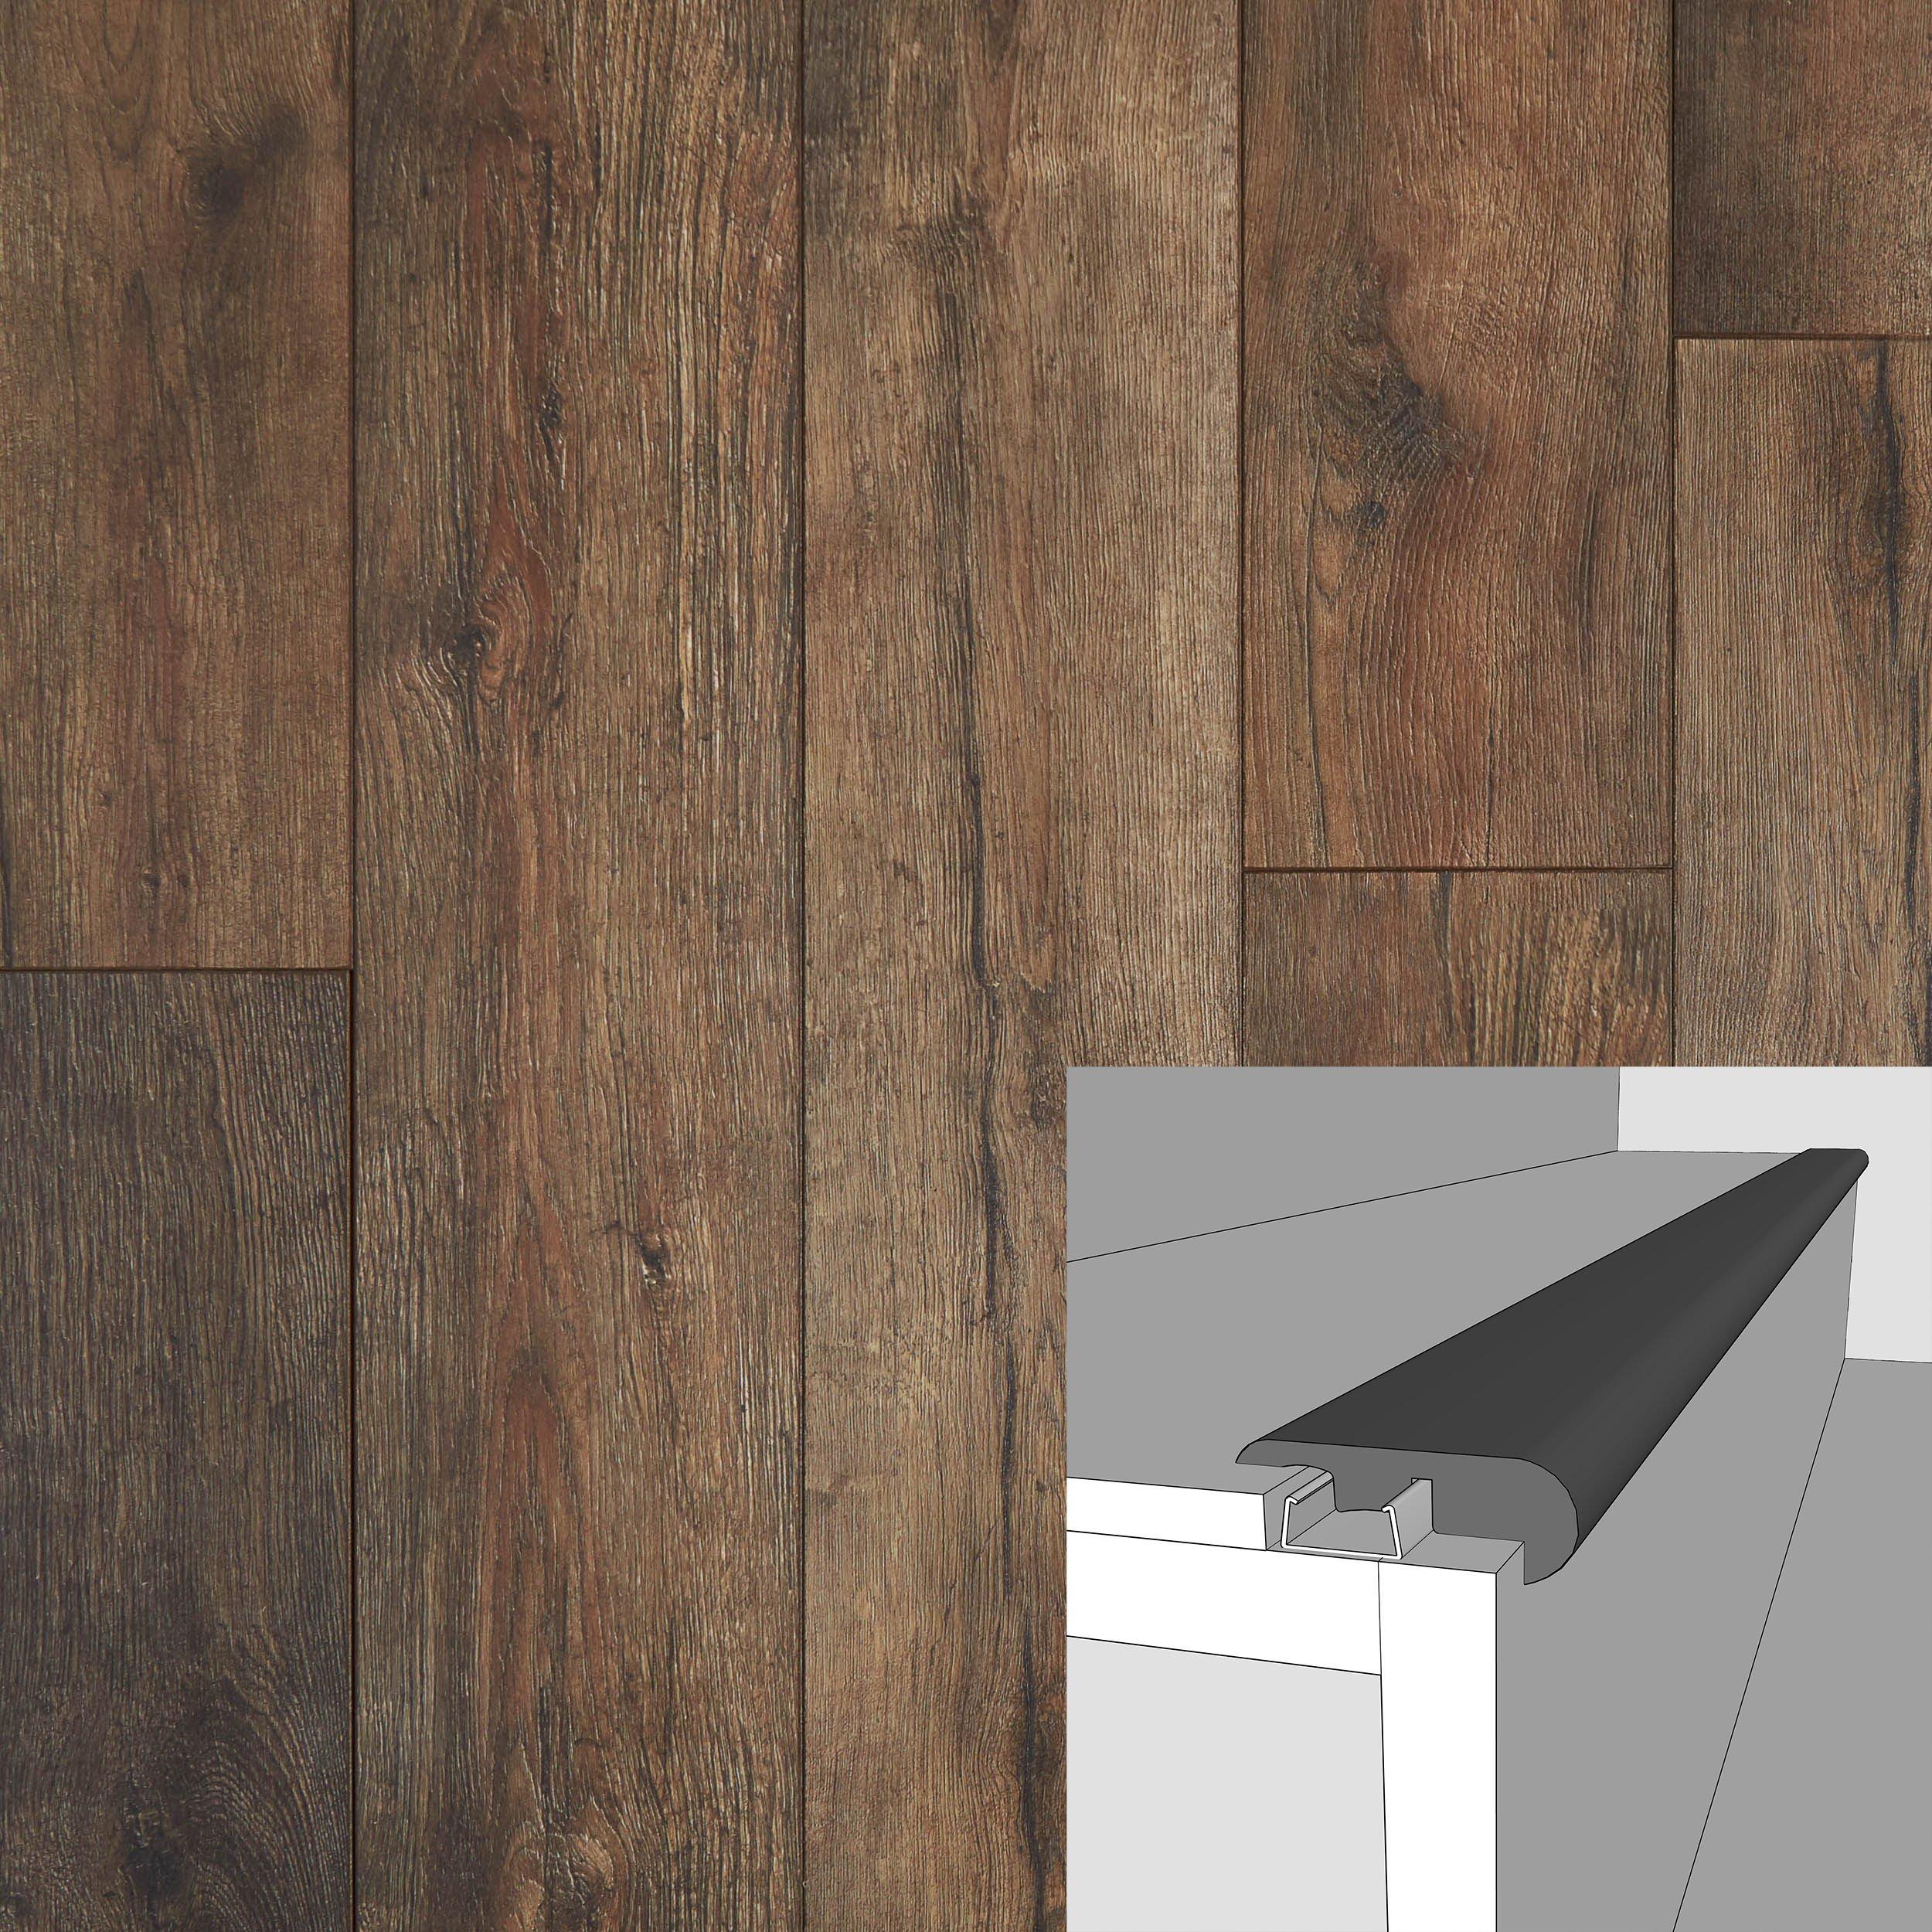 Tranquil Canyon 94in. Laminate Overlapping Stair Nose